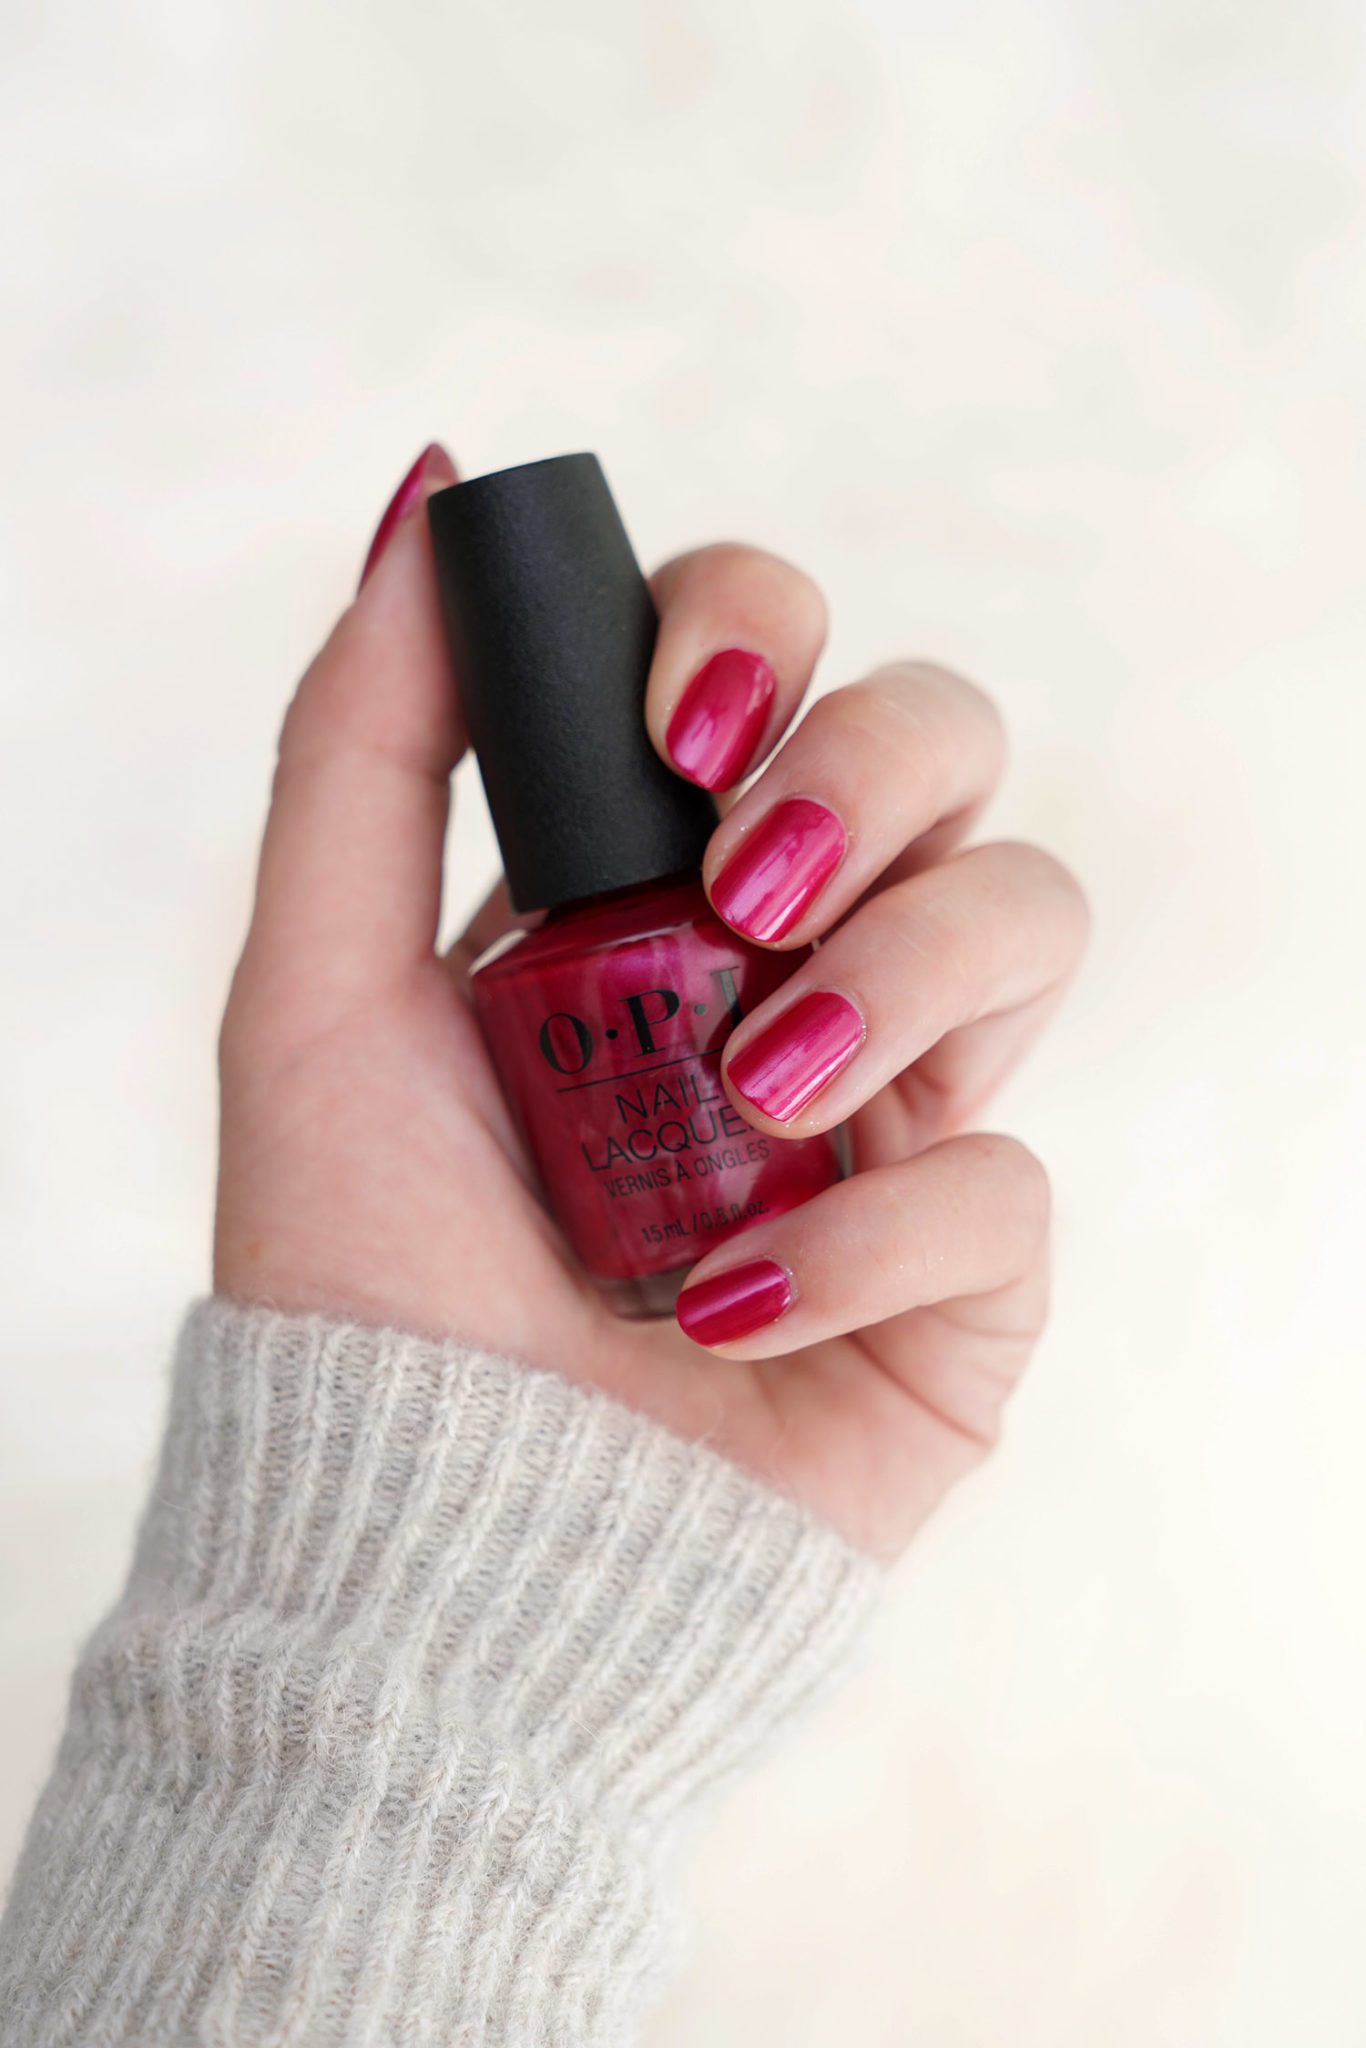 Holiday Nail Polish Swatches OPI, Smith & Cult + Dior - The Beauty Look ...